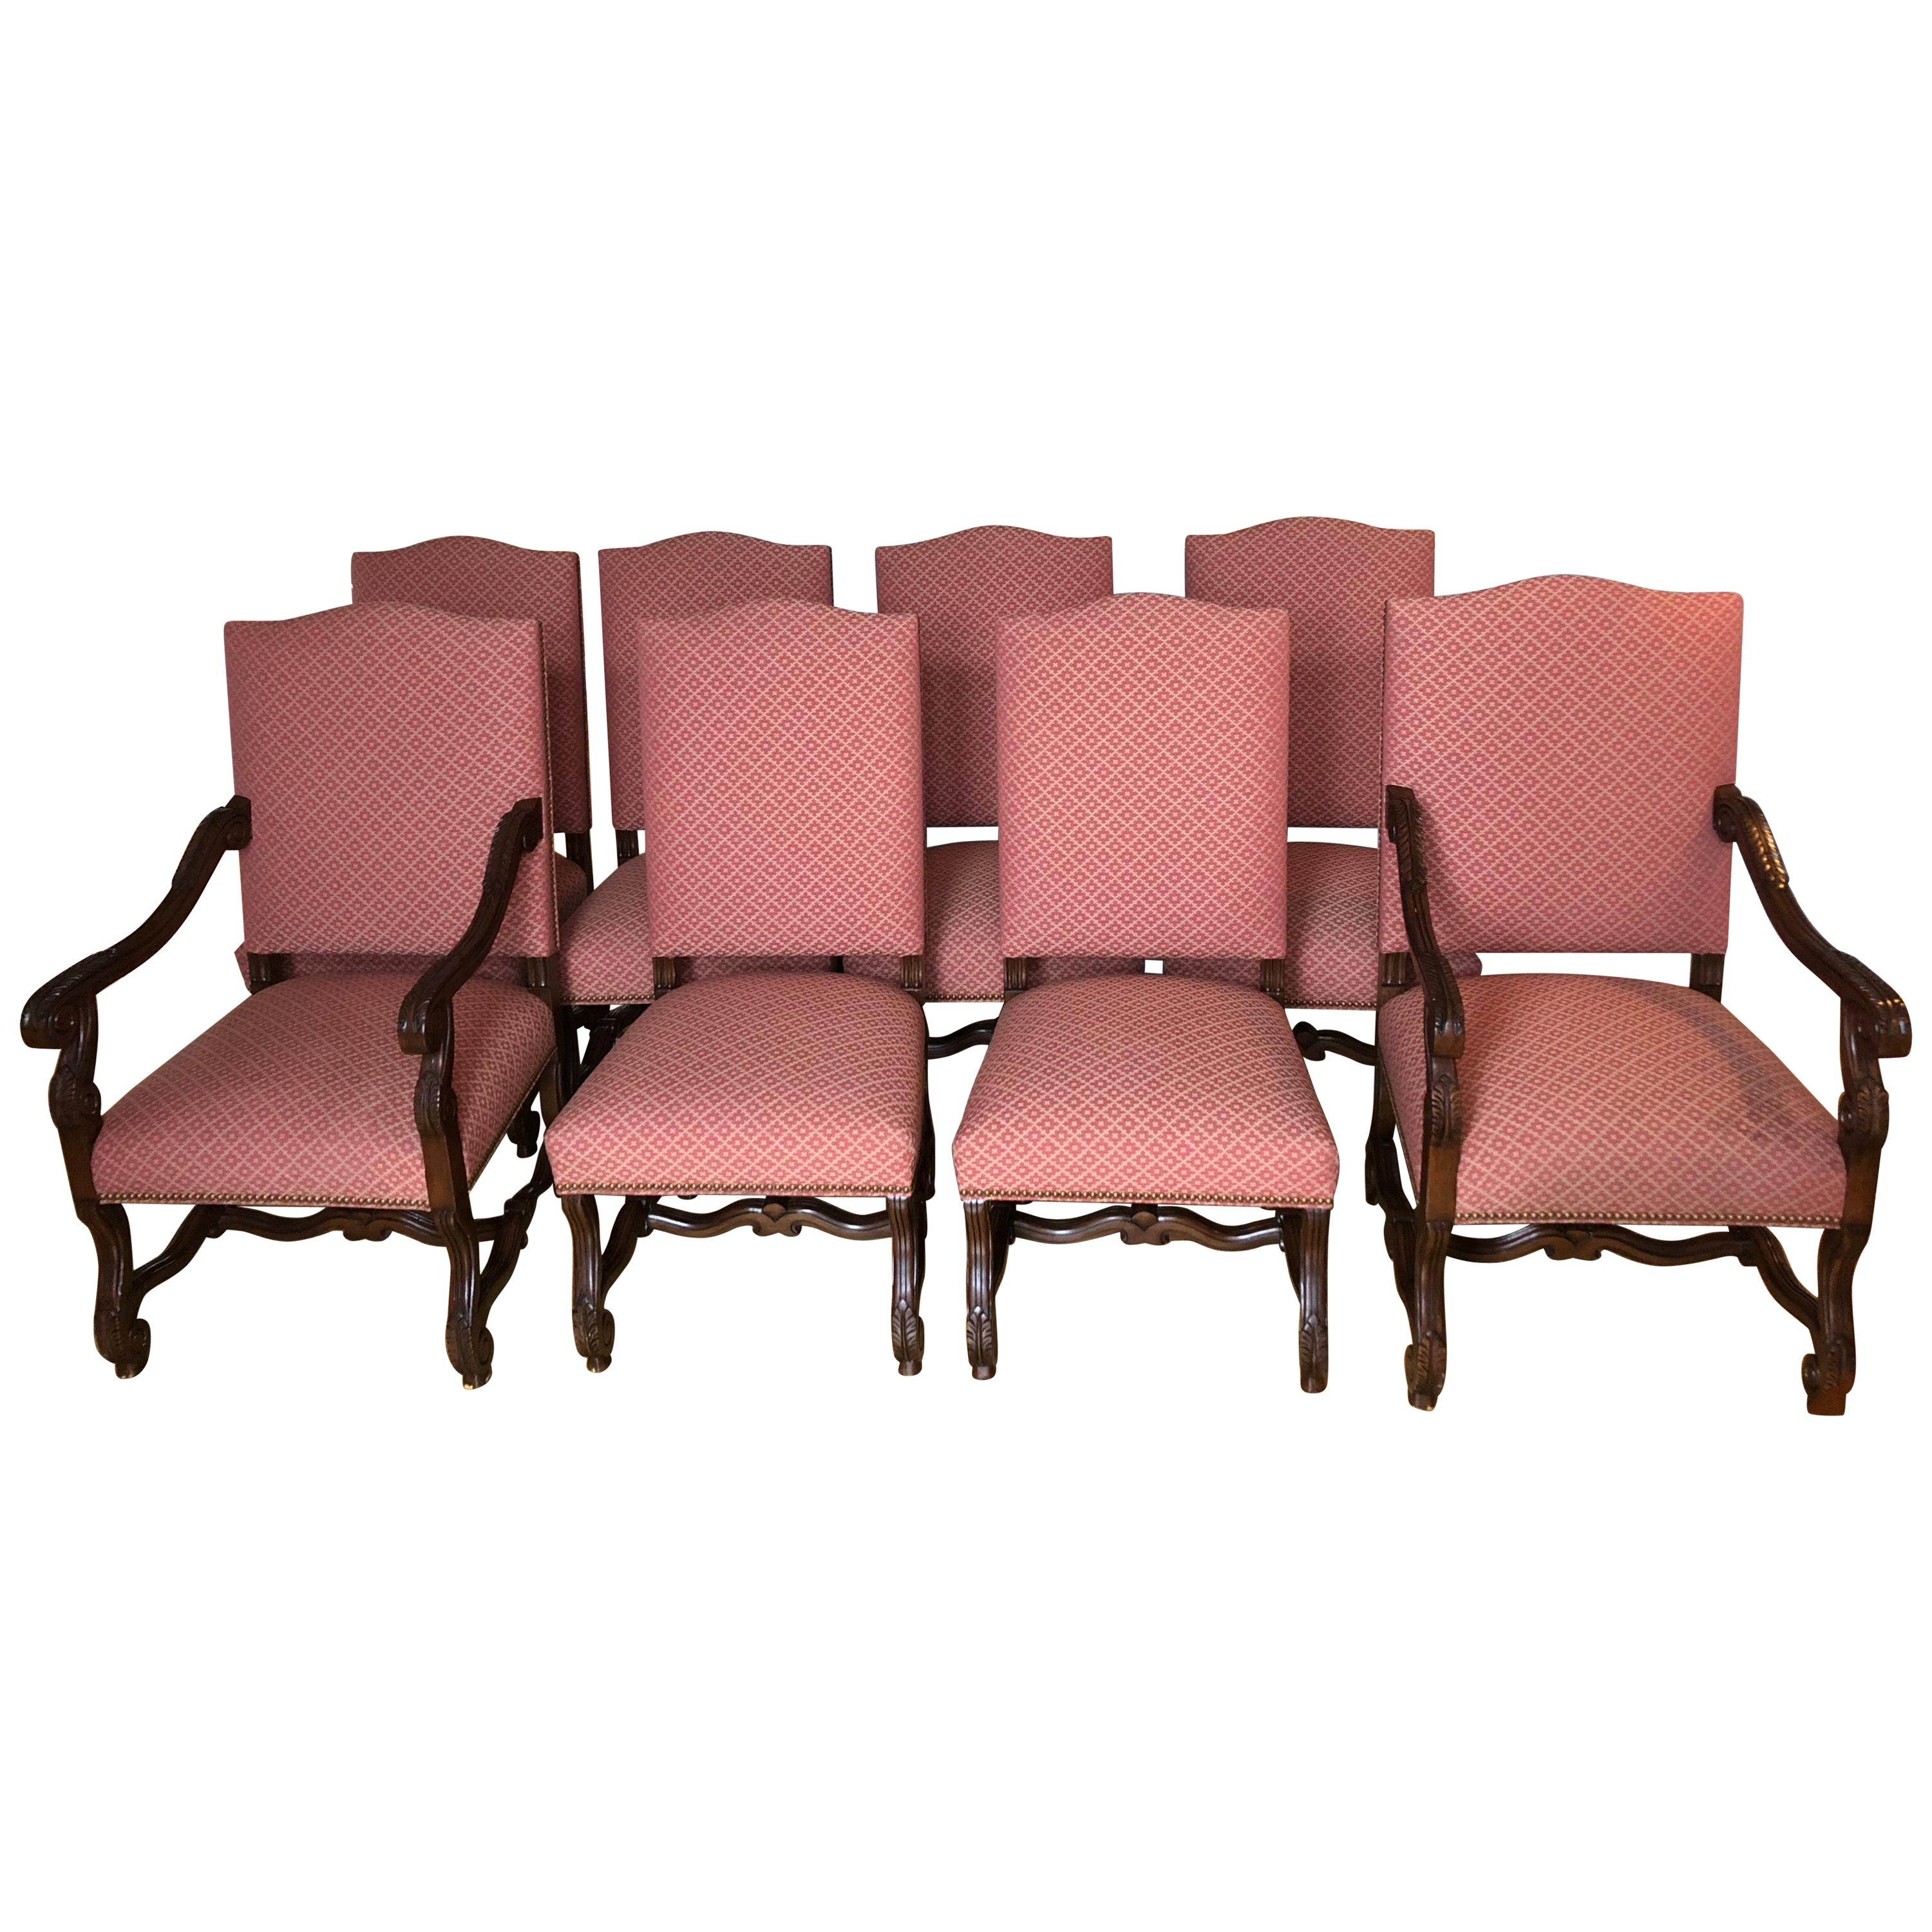 Set of 8 Impressive Carved Wood and Upholstered Chippendale Style Dining Chairs